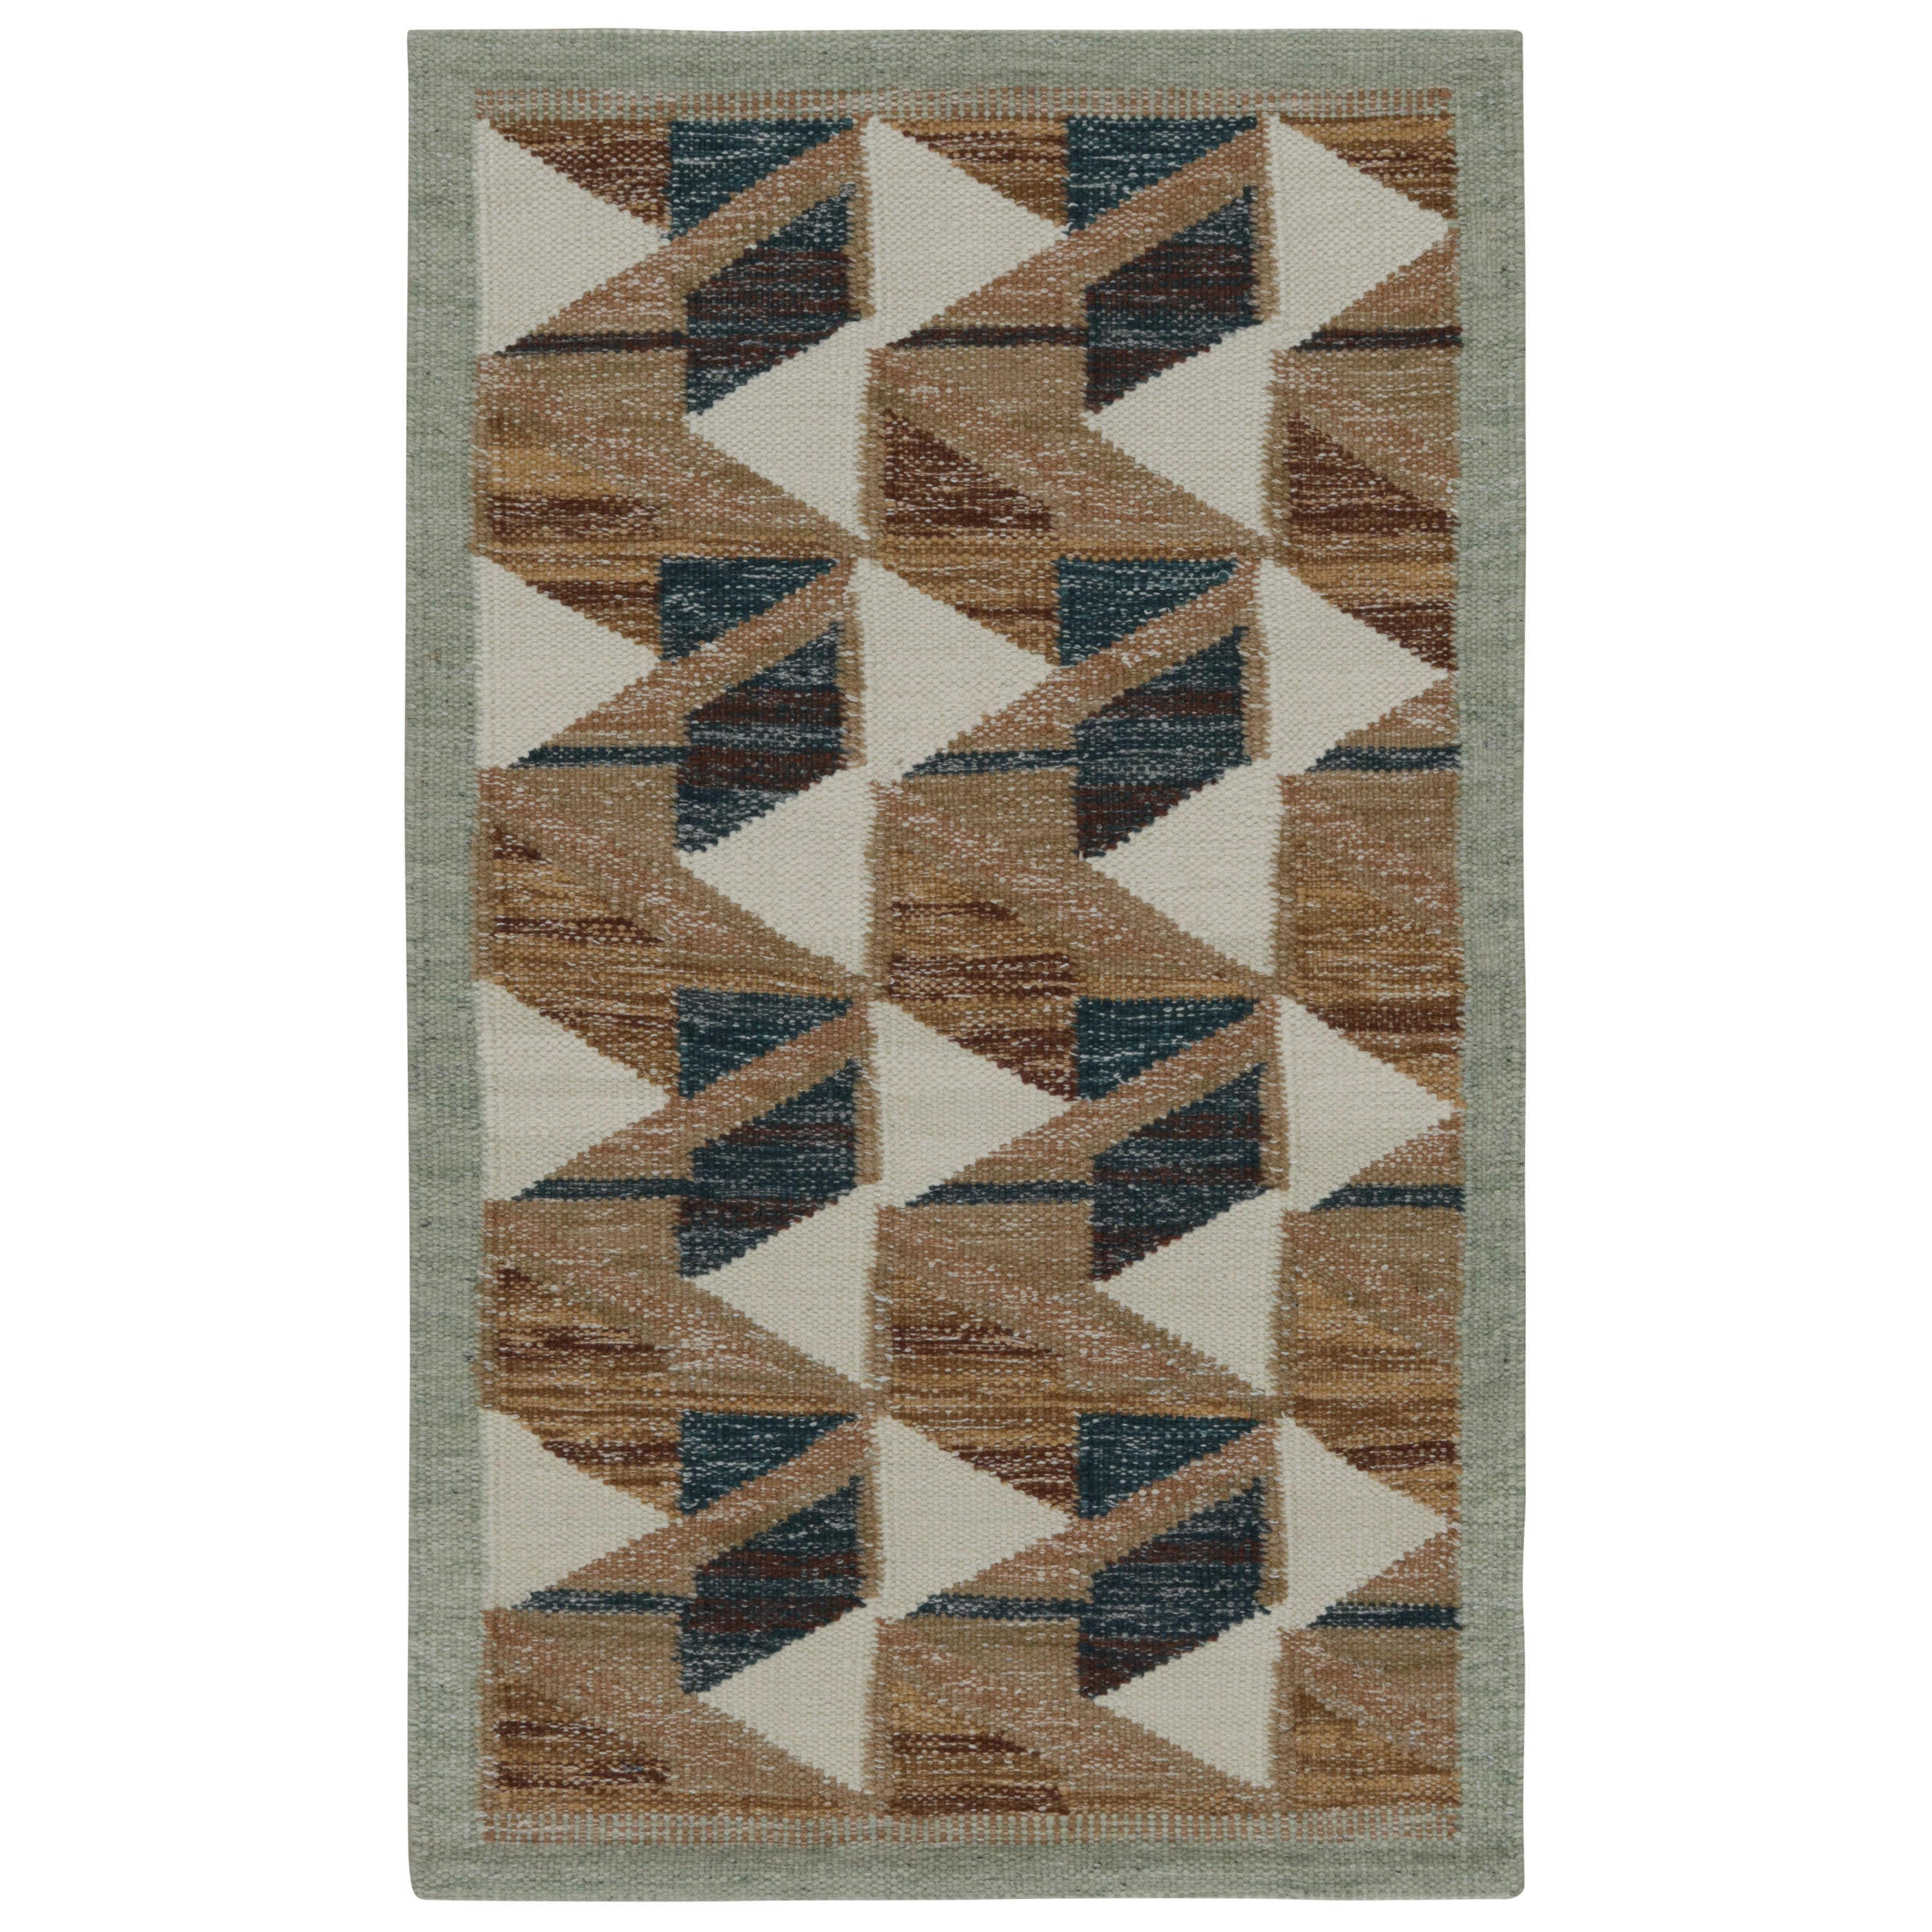 Rug & Kilim’s Scandinavian Style Kilim Rug with Brown & Blue Geometric Patterns For Sale